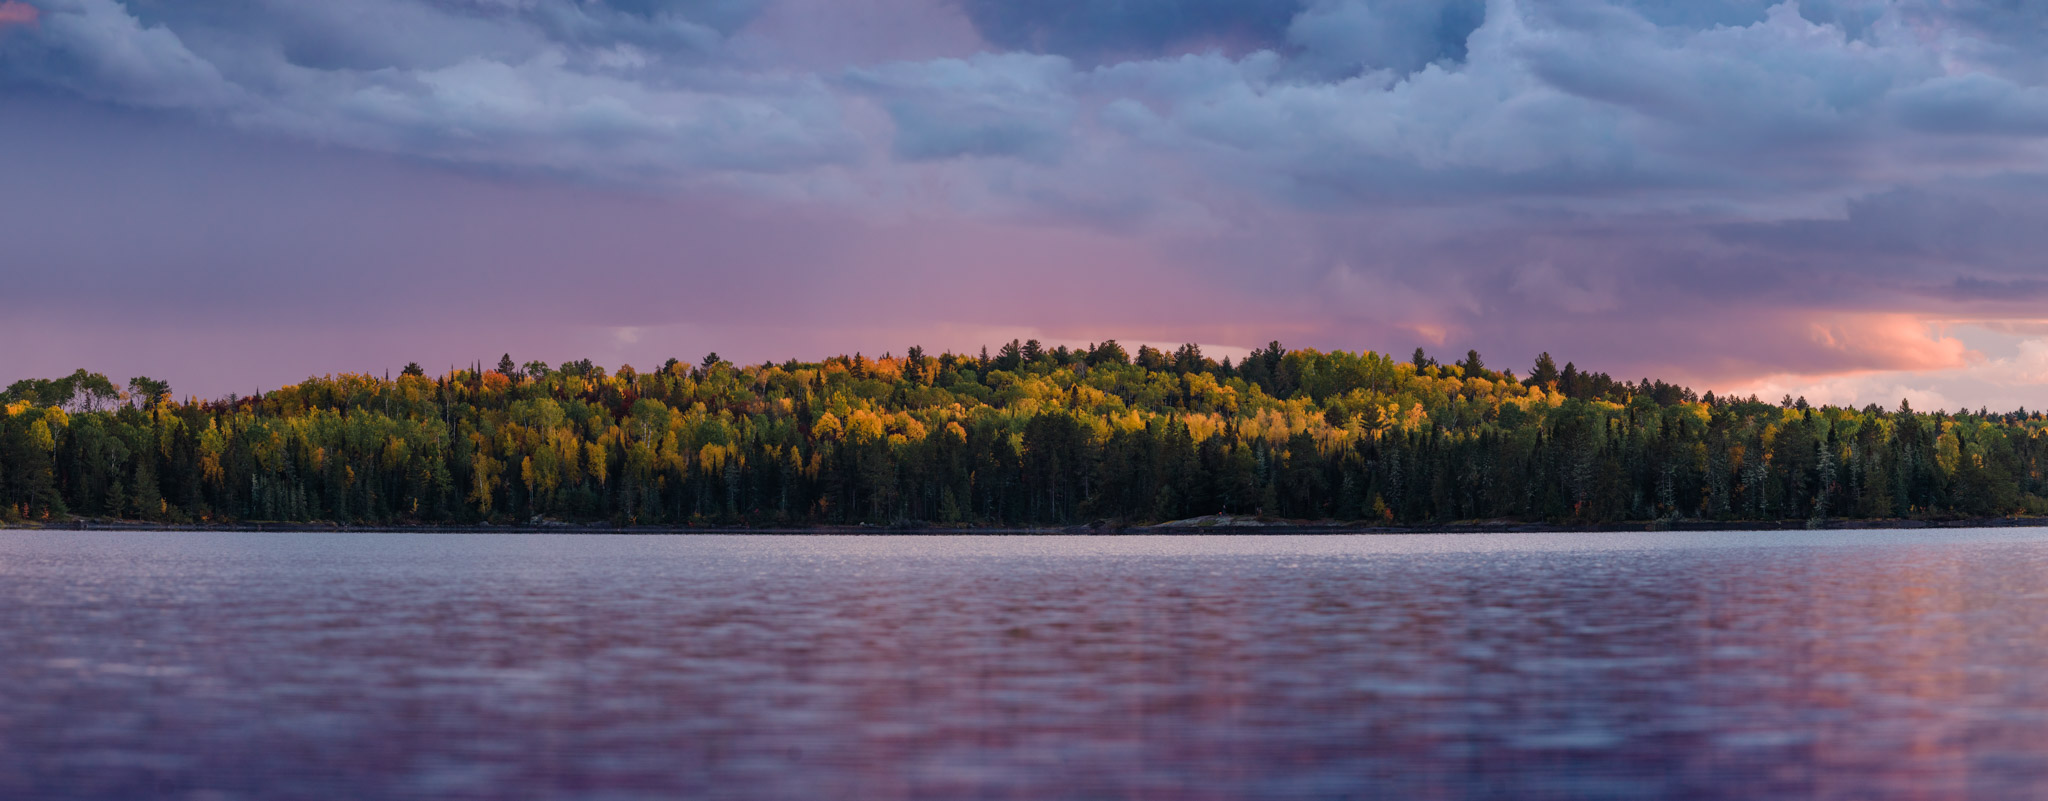 fall-on-fourtown-bwca-boundary-waters-canoe-area-wilderness-fourtown-lake-fall-sunset-large-format-panoramic-1